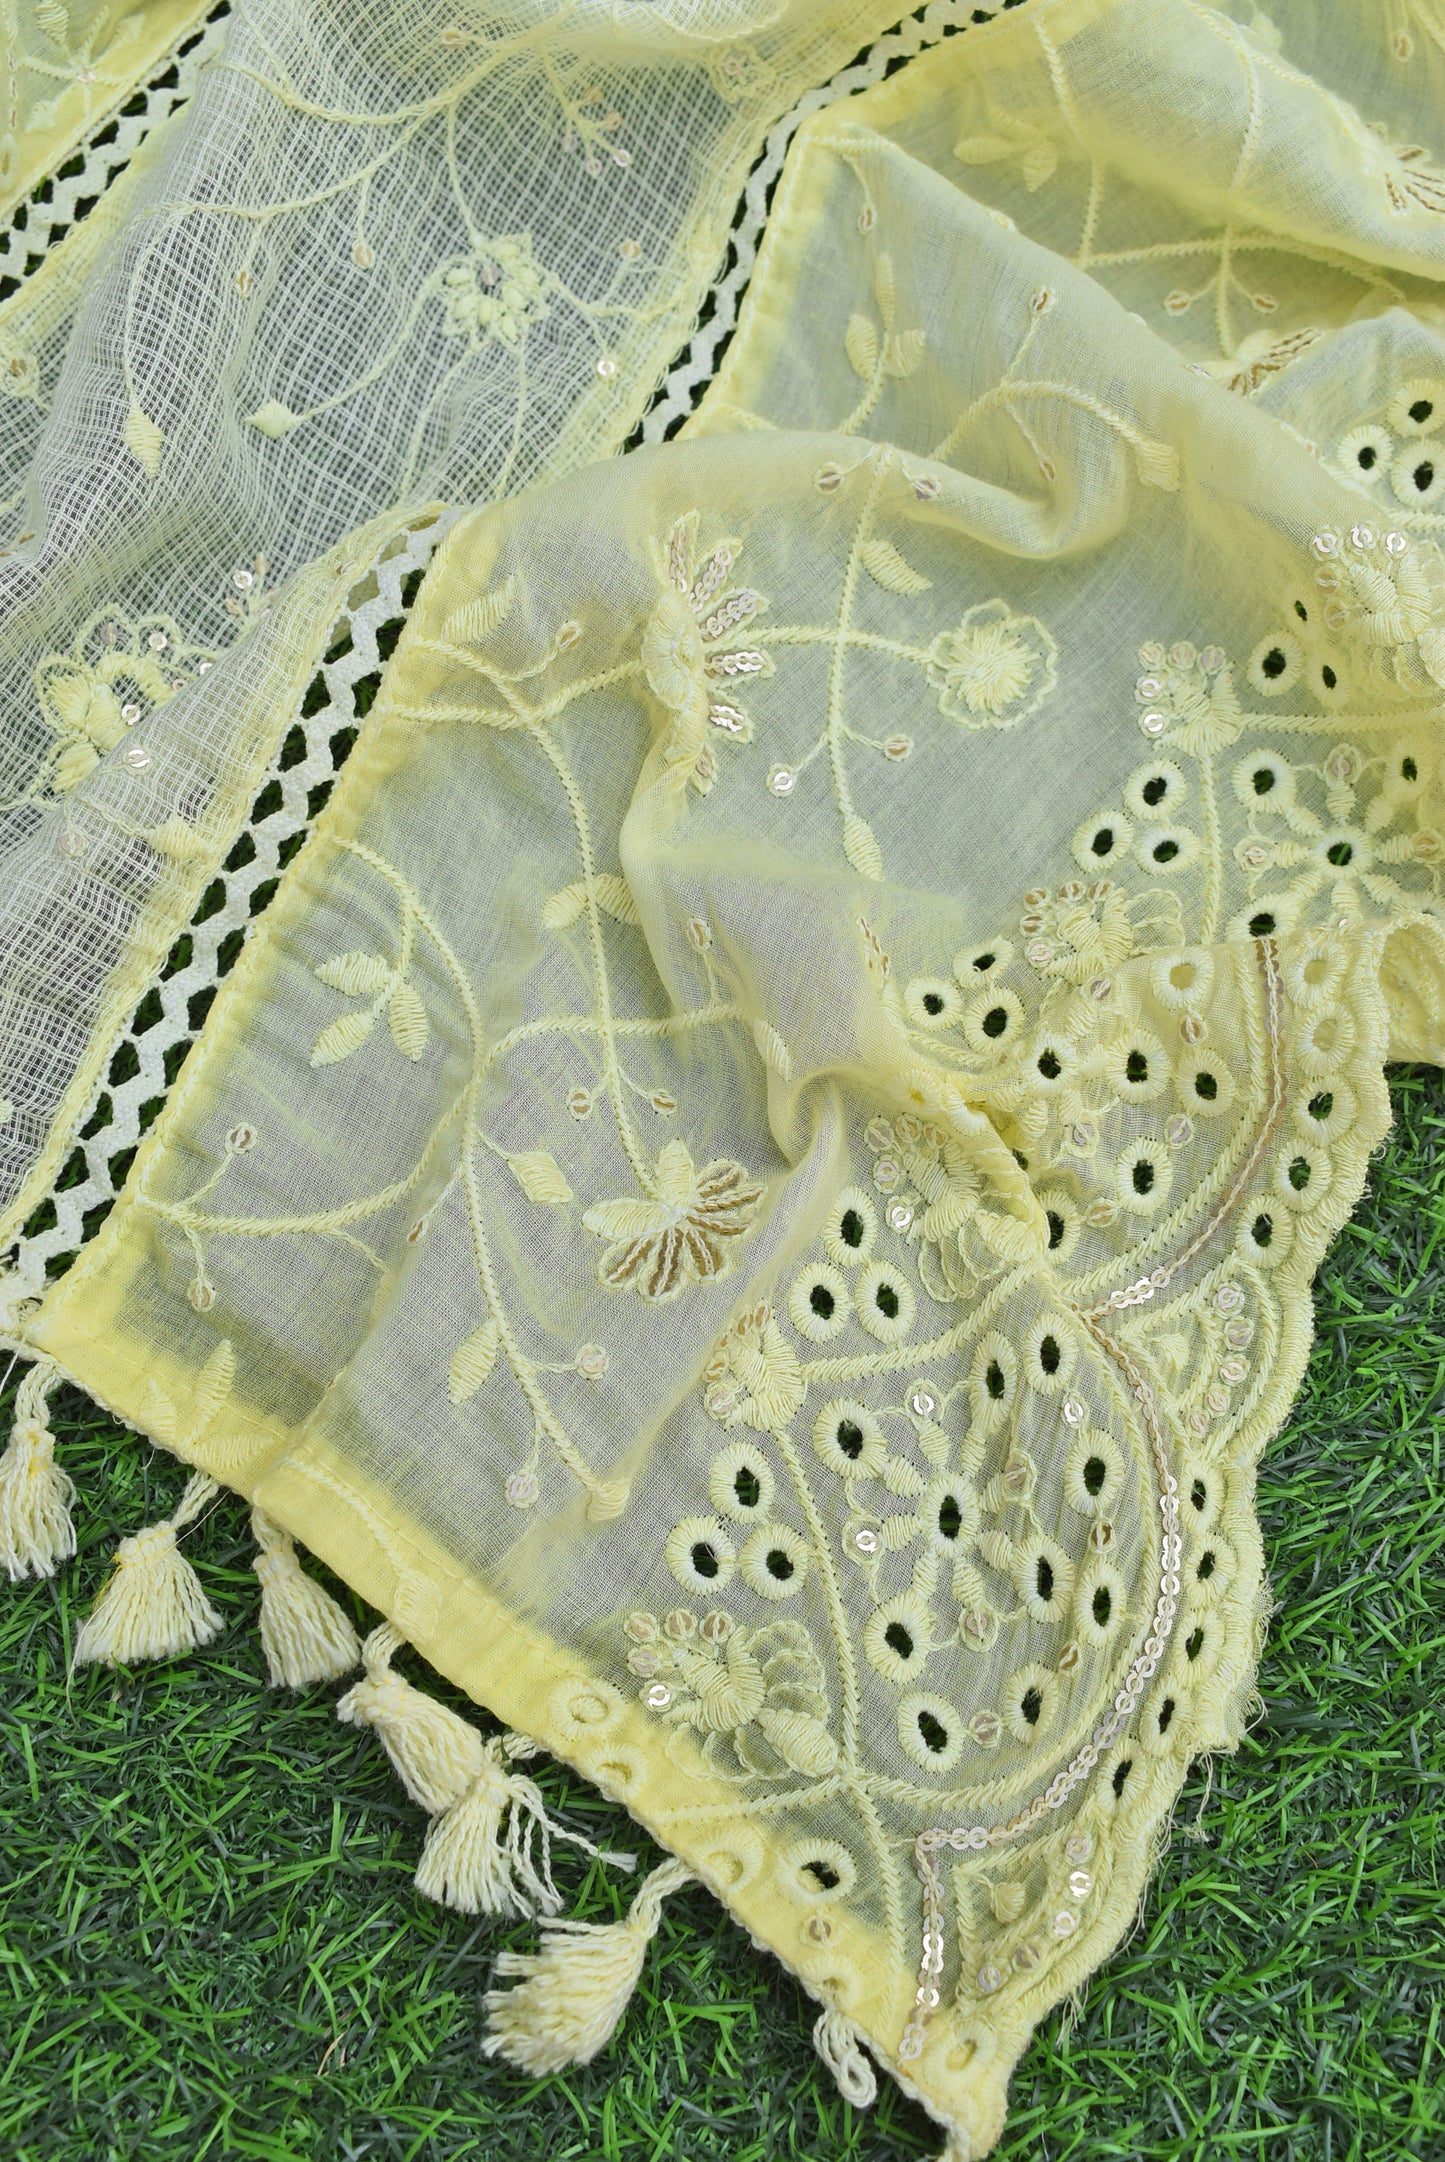 Gorgeous Embroidered Cotton and Kota Doria Dupatta with Sequin work